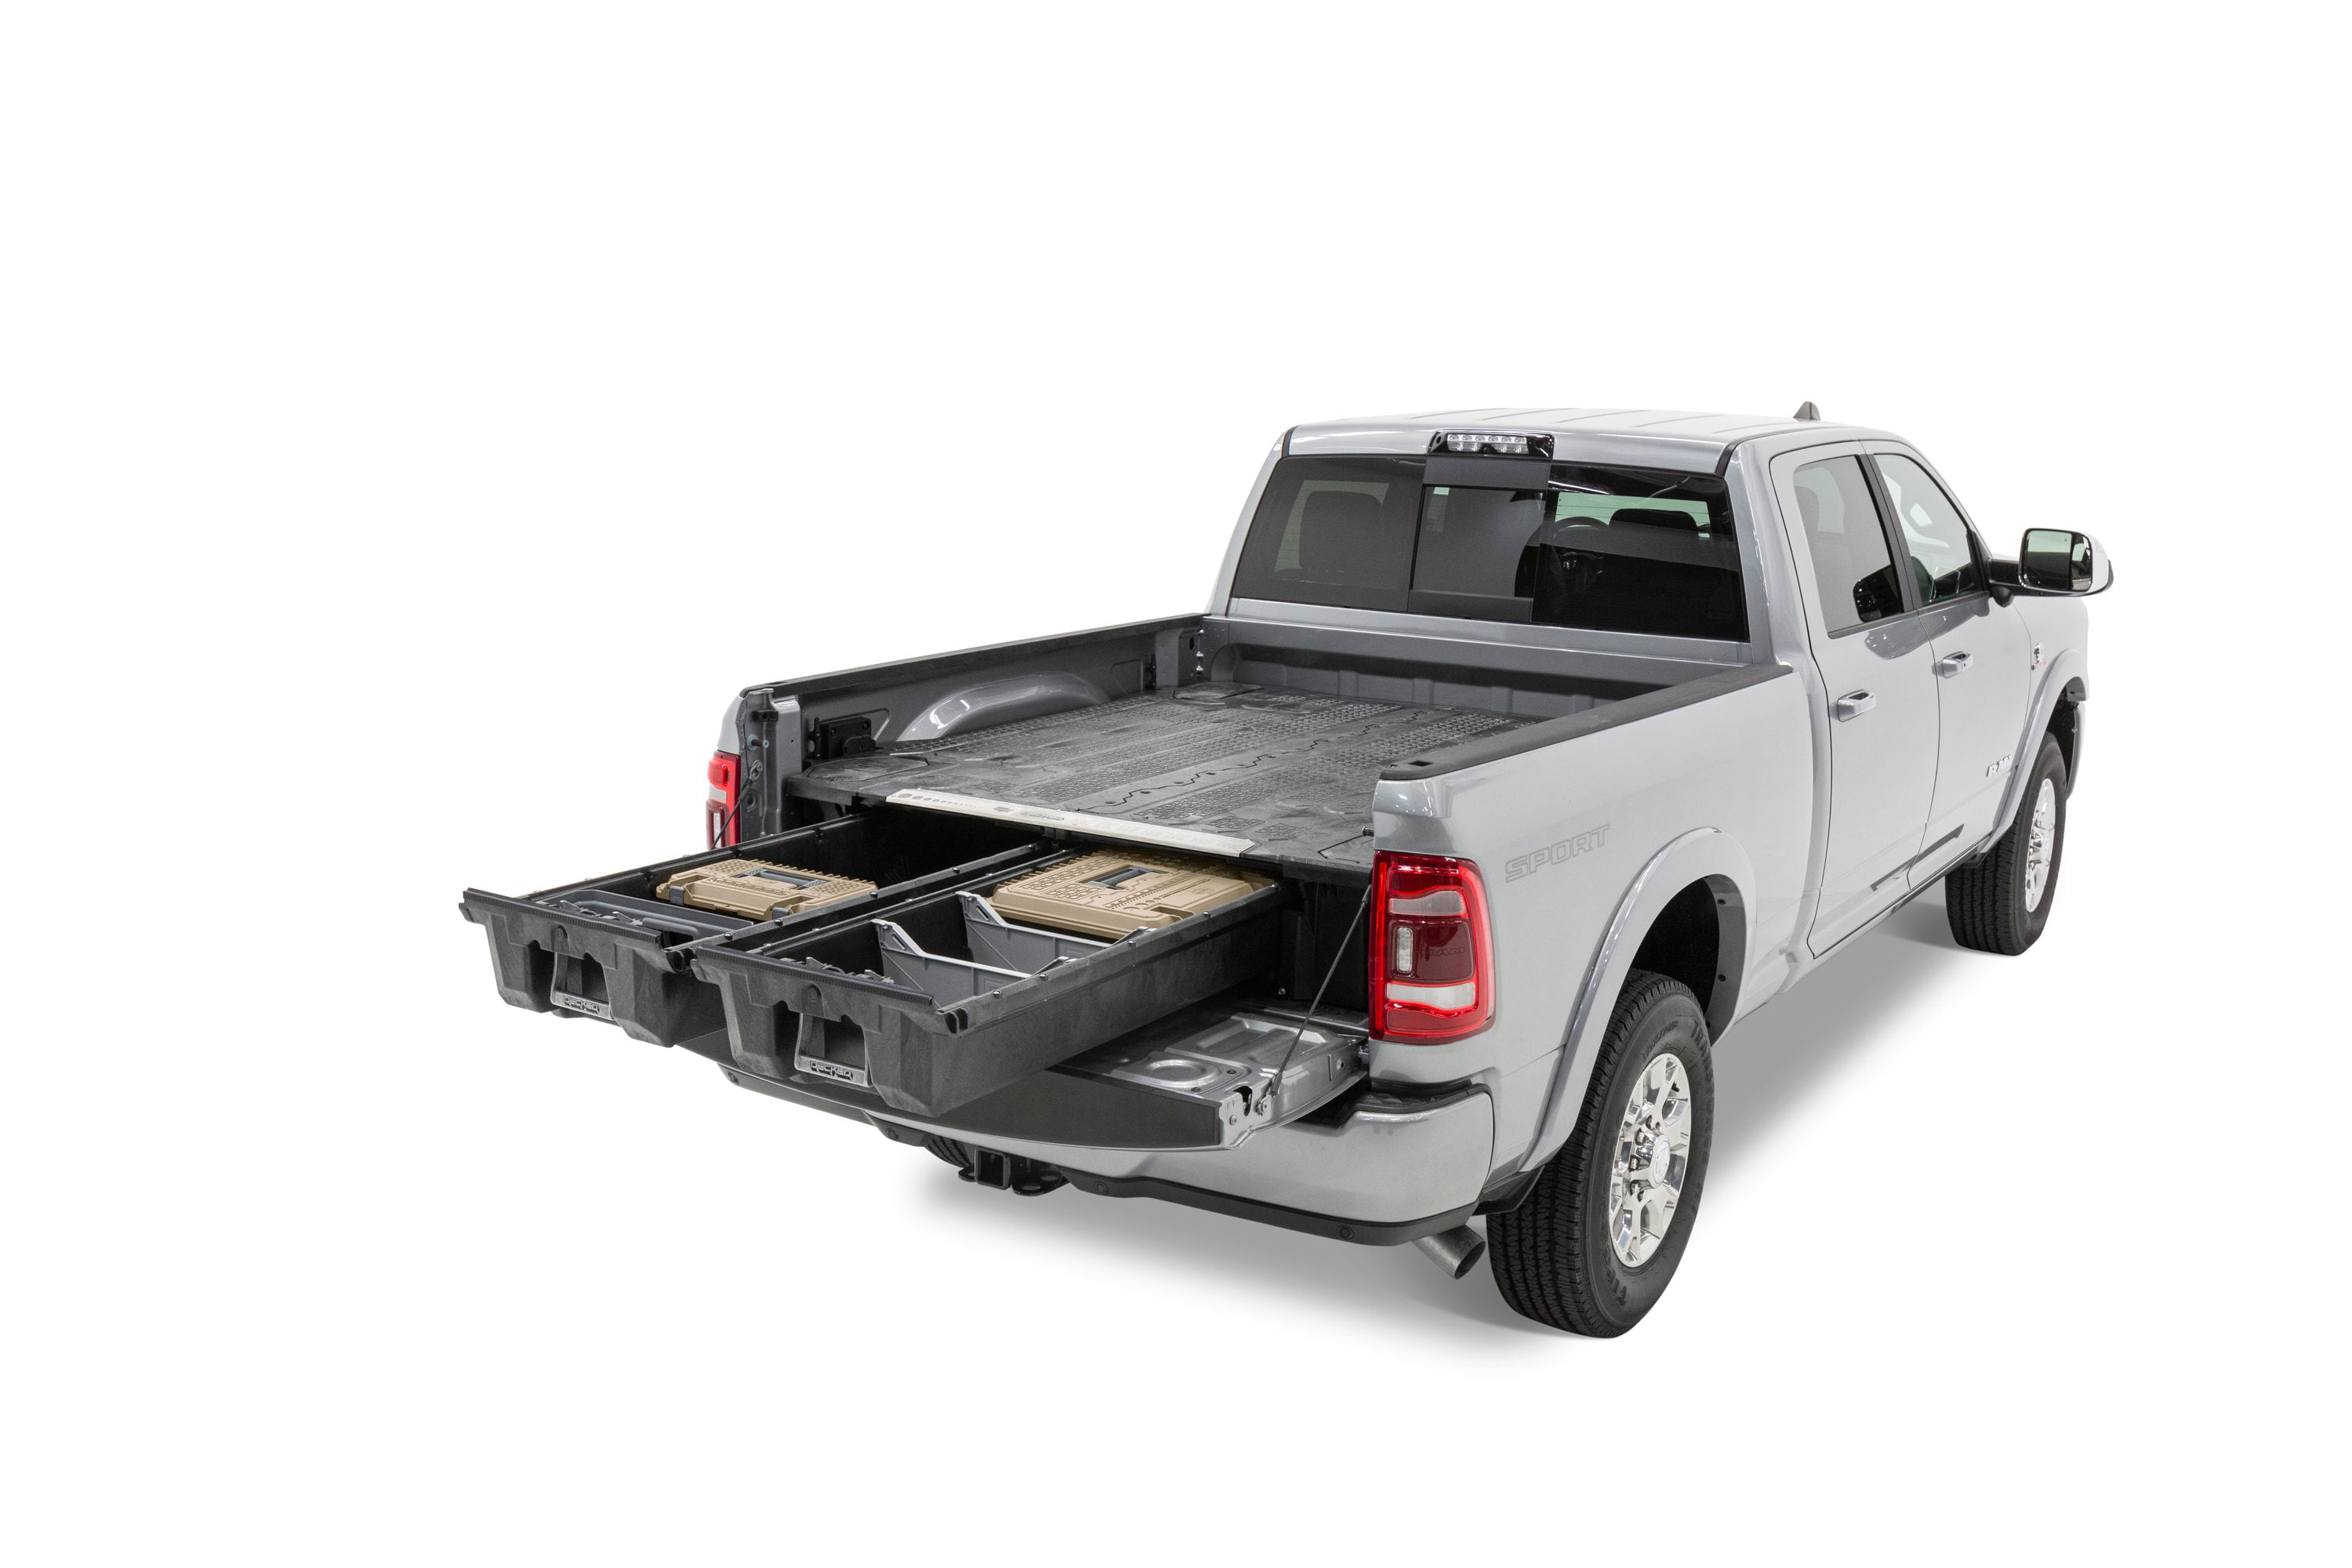 DECKED DECKED Storage System for RAM 1500 (1994-2001) 2500 and 3500 (1994-2002)- 6-ft 4-in Bed Length in Black | DR1